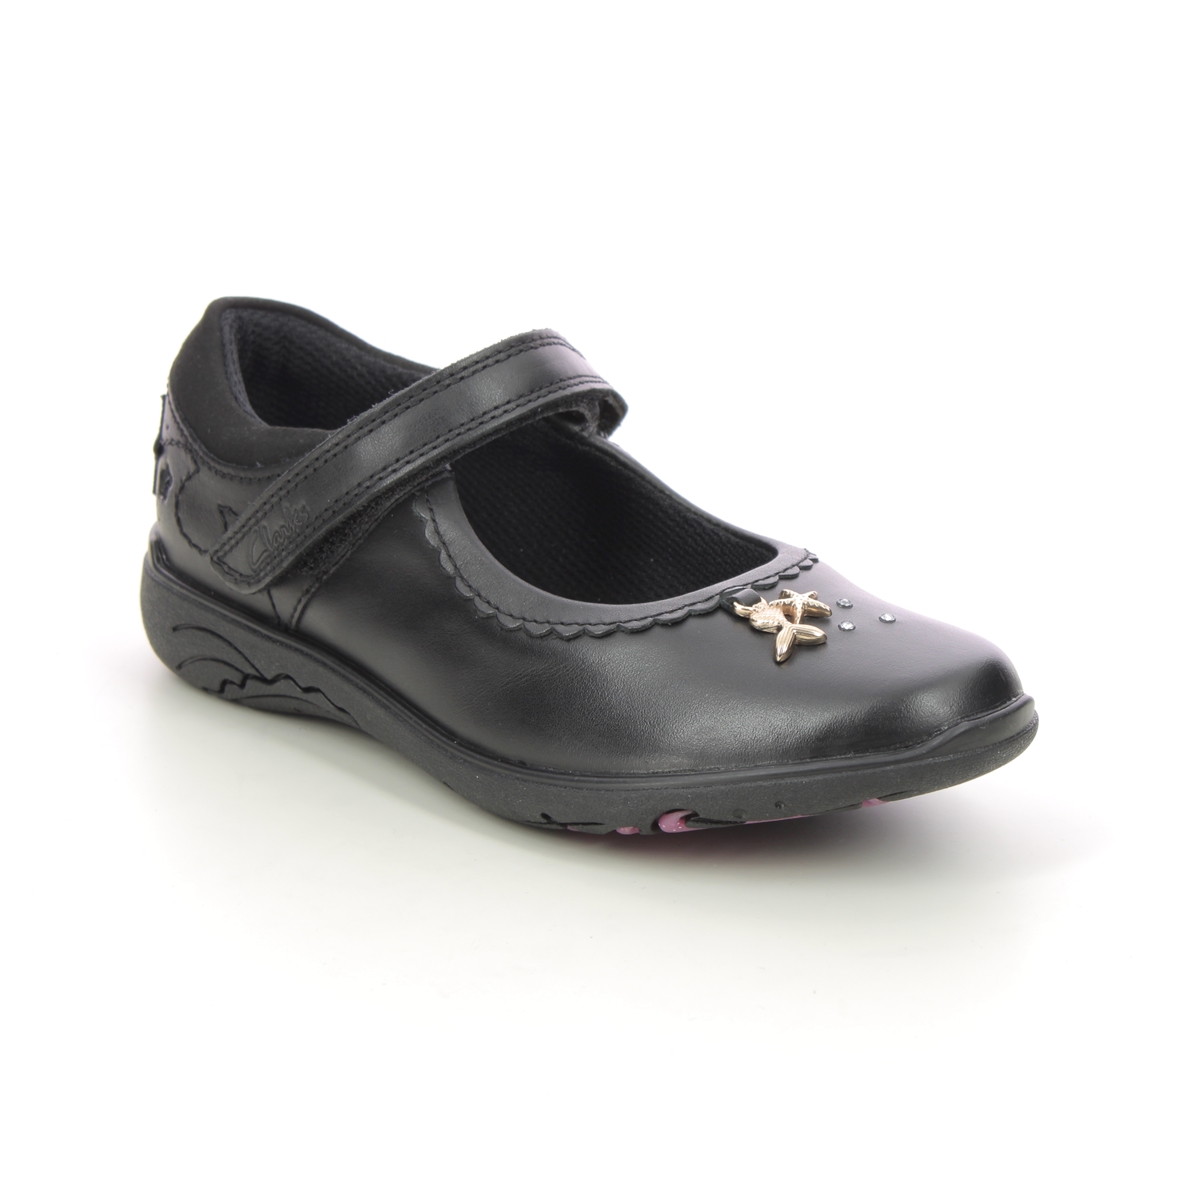 Clarks Relda Sea K Mary Jane Black Leather Kids Girls School Shoes 722407G In Size 11.5 In Plain Black Leather G Width Fitting For School For kids